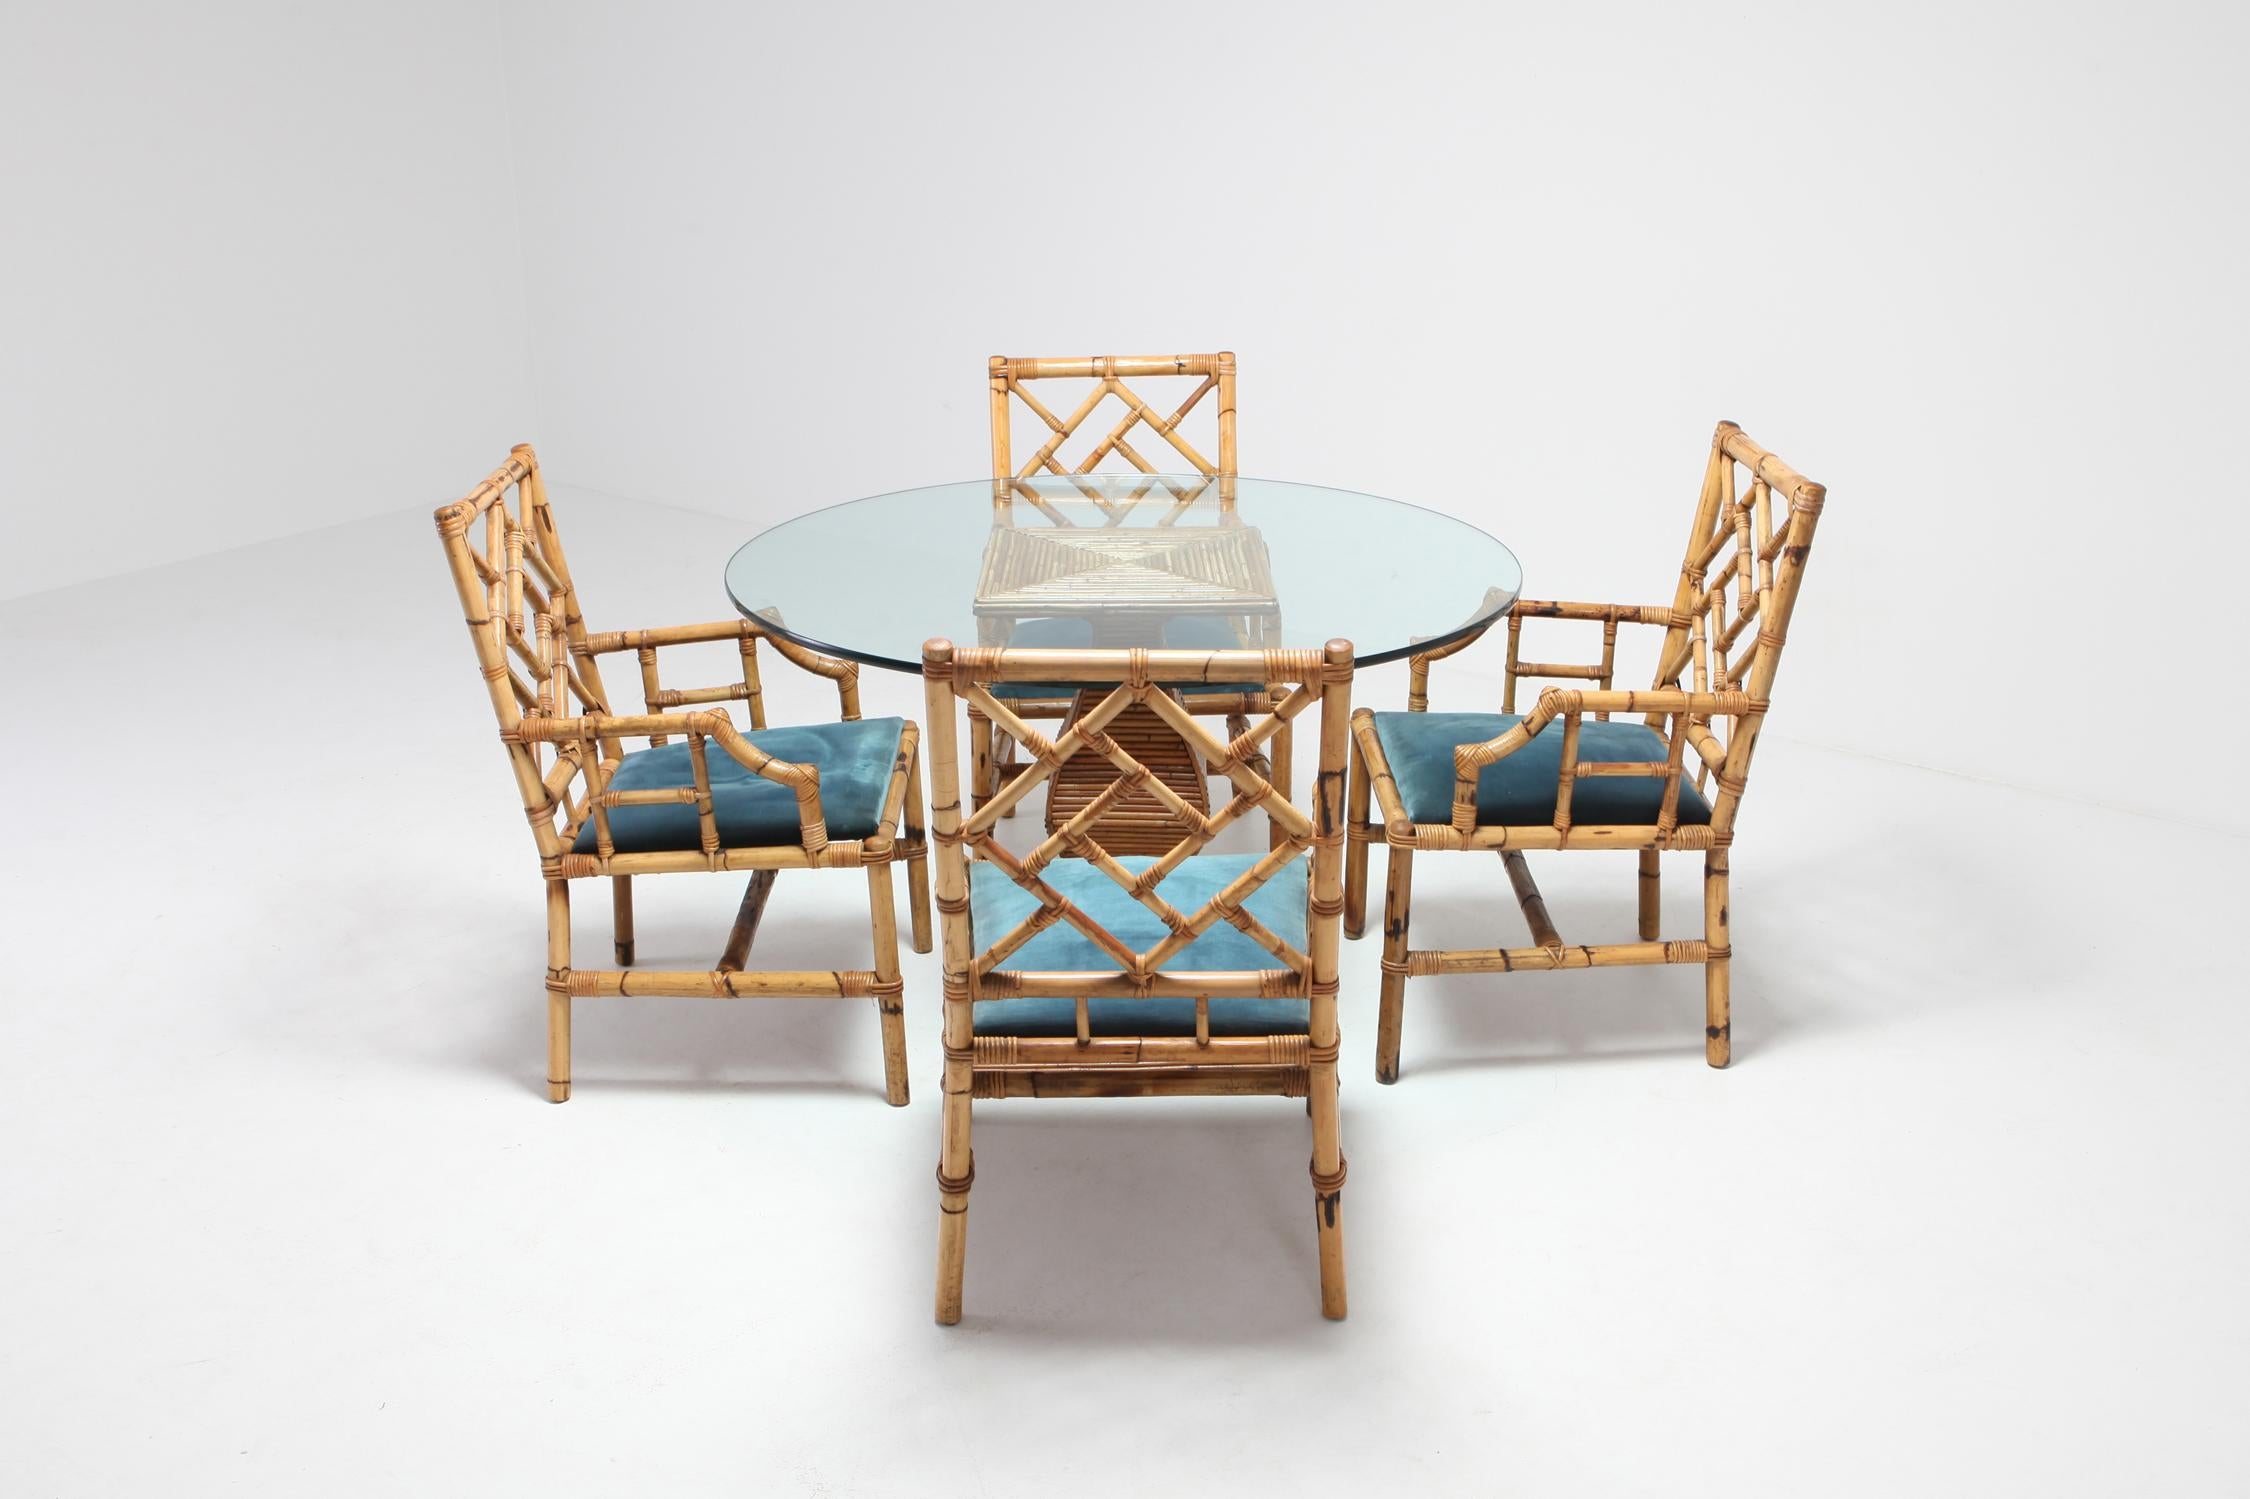 Gabriella Crespi style dining suite in bamboo by Vivai del Sud, Italy, 1970s. Great Italian glam piece that fits well in an eclectic Hollywood regency interior. 
The listing includes four chairs and one round dining table by Vival del Sud.
We've